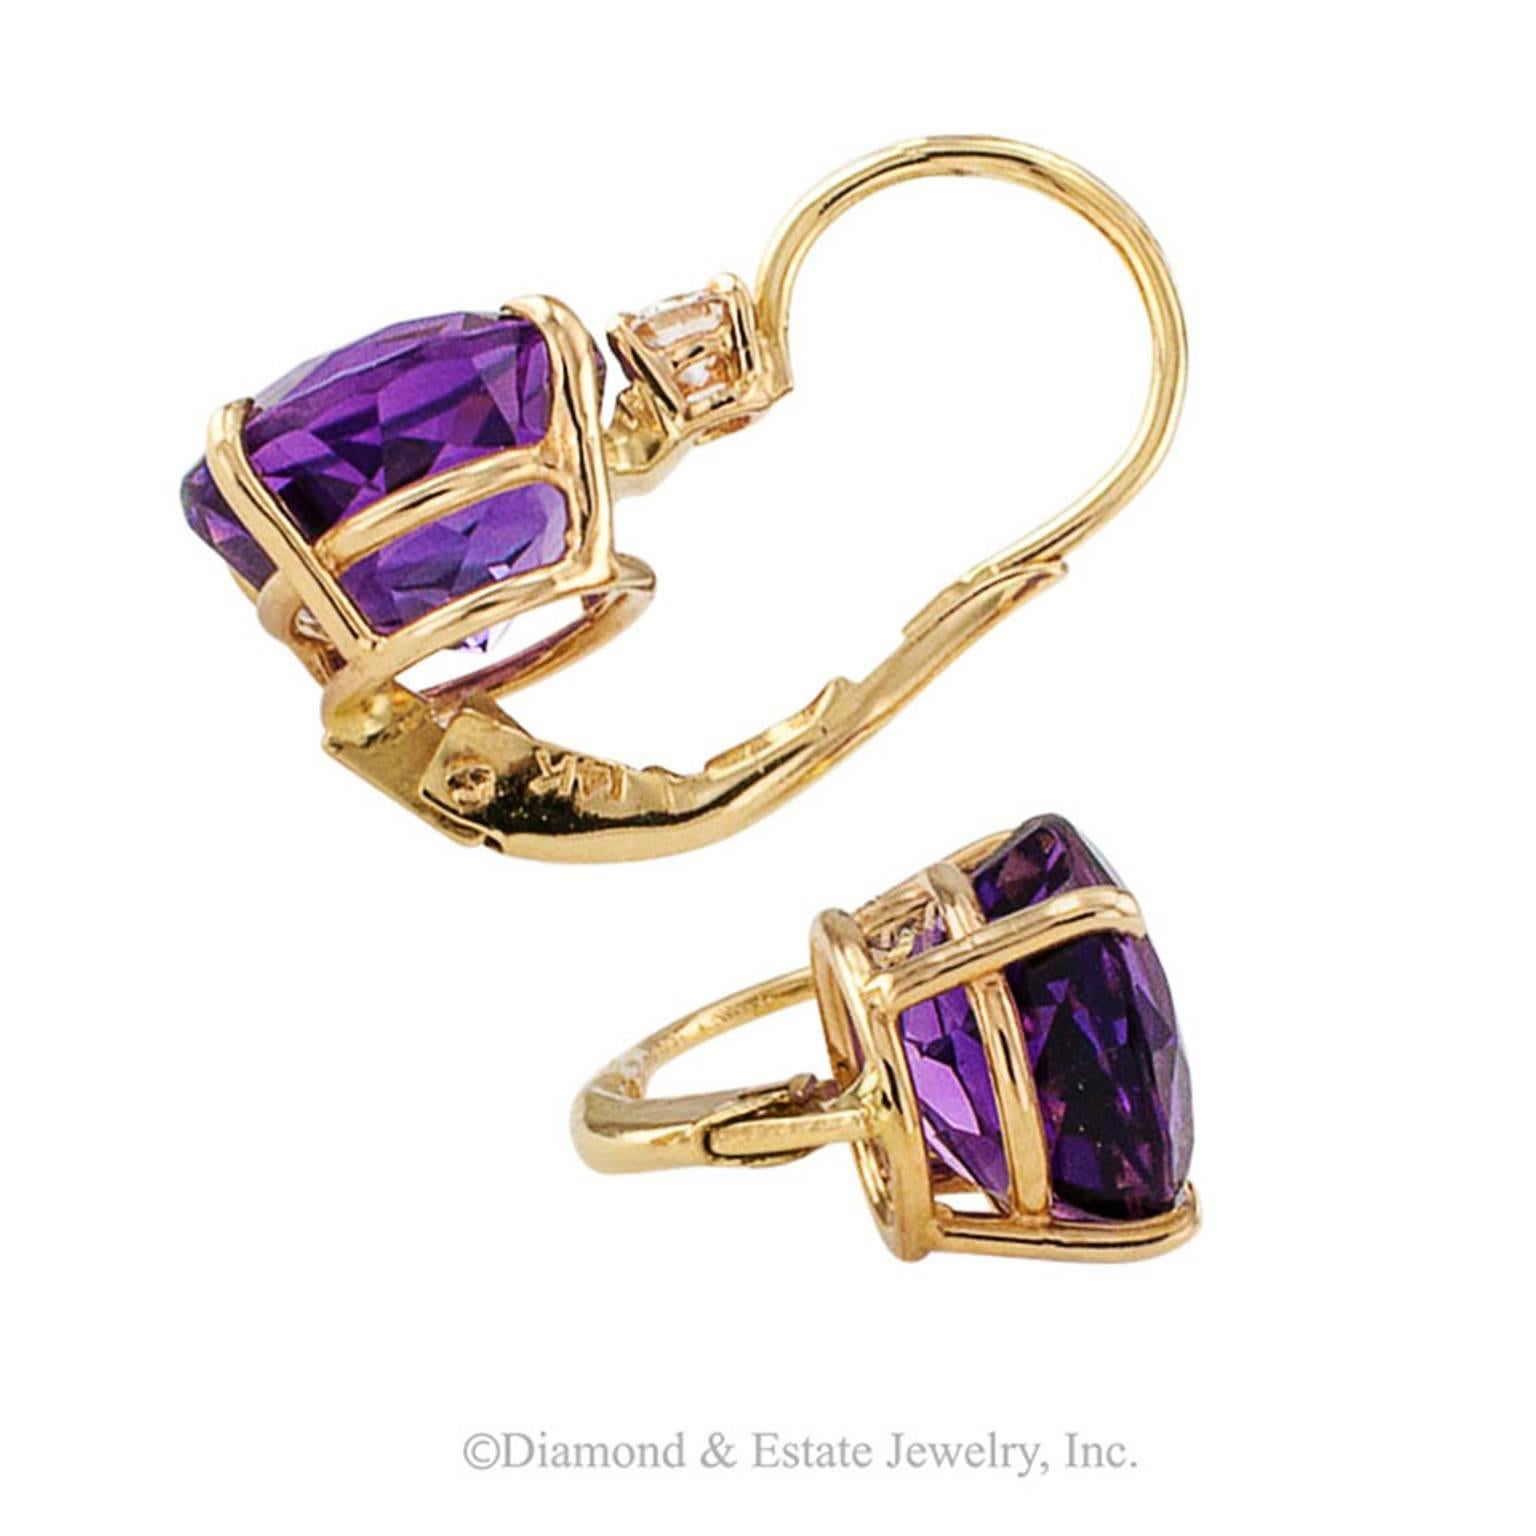 Amethyst and Diamond Earrings

If you want a nice pair of amethyst earrings that will do double duty, casual and dressy, these are pretty good candidates.  Practical everyday wear earrings.  Well matched and vibrant amethyst together weighing 5.71